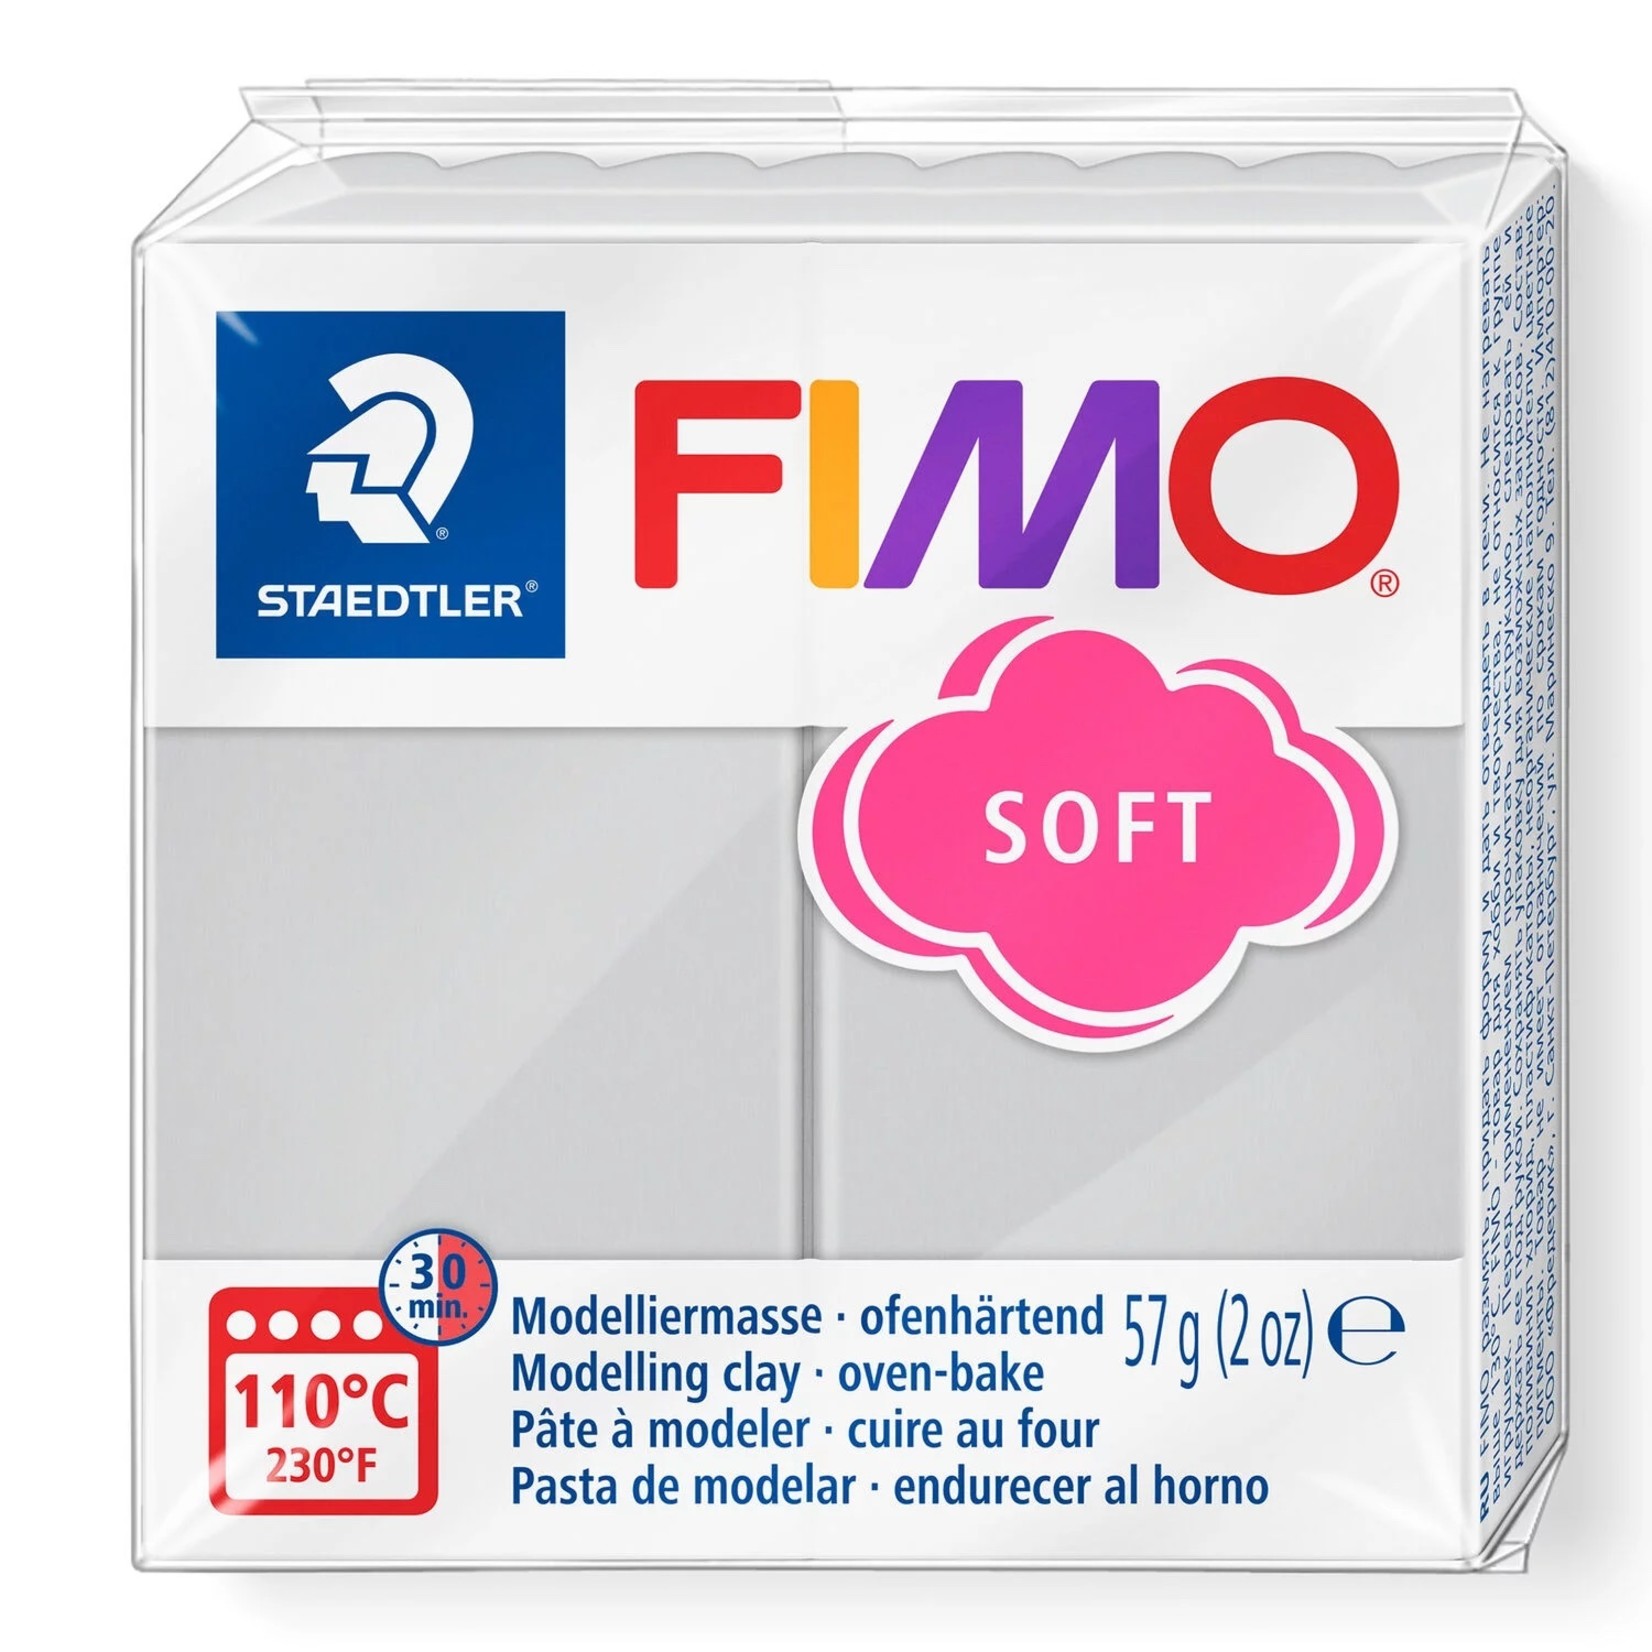 STAEDTLER FIMO SOFT 80 DOLPHIN GRAY